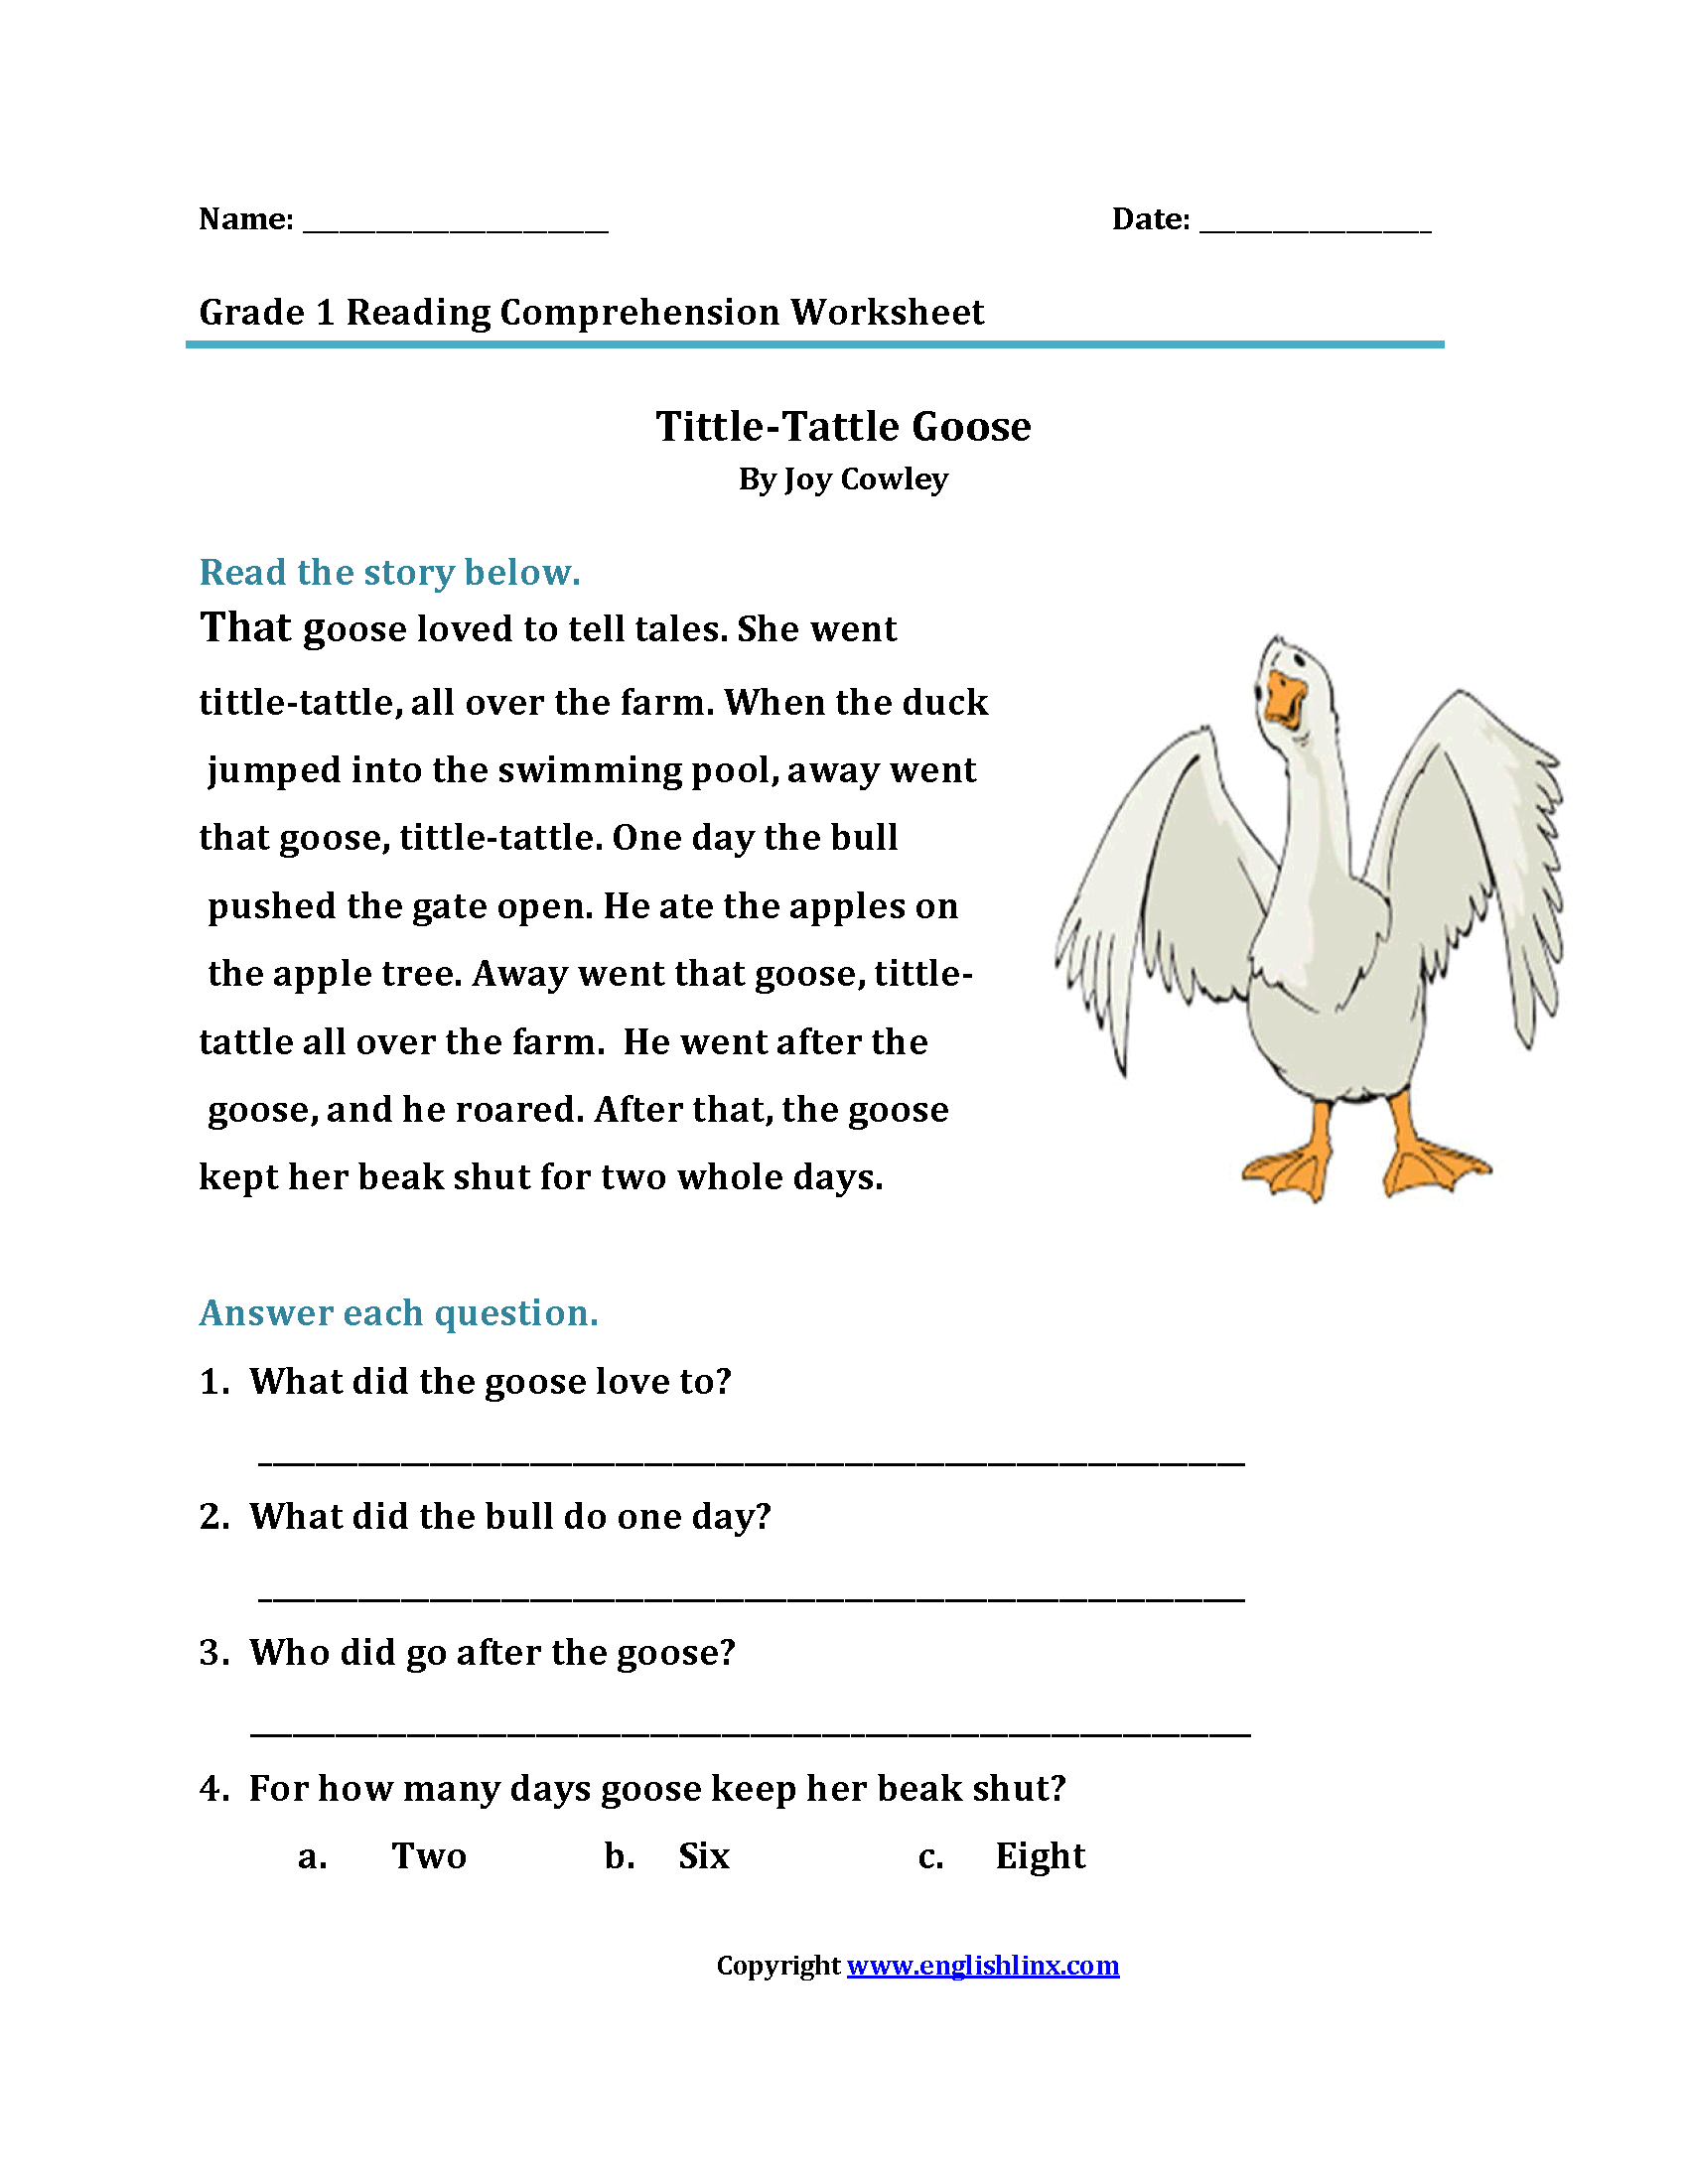 Tittle Tattle Goose First Grade Reading Worksheets